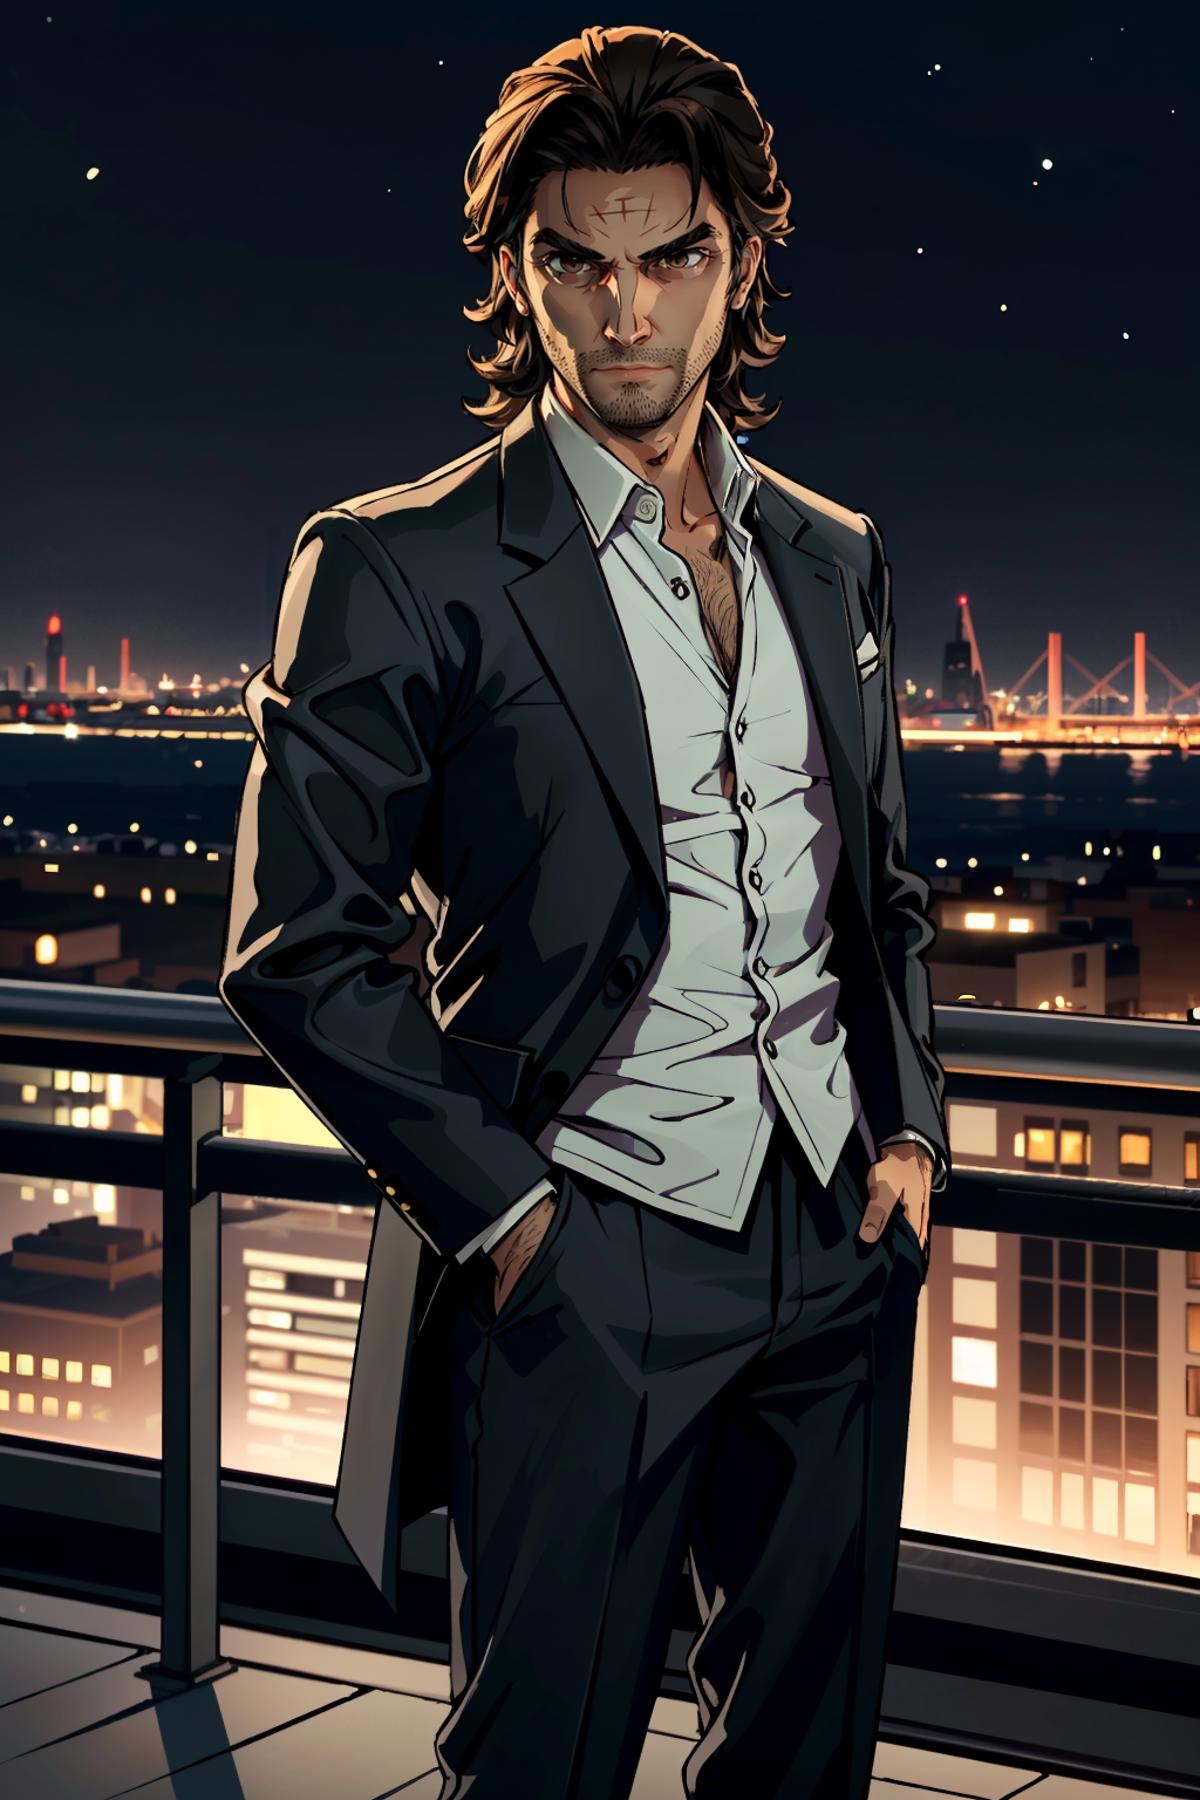 Bigby Wolf from The Wolf Among Us image by BloodRedKittie